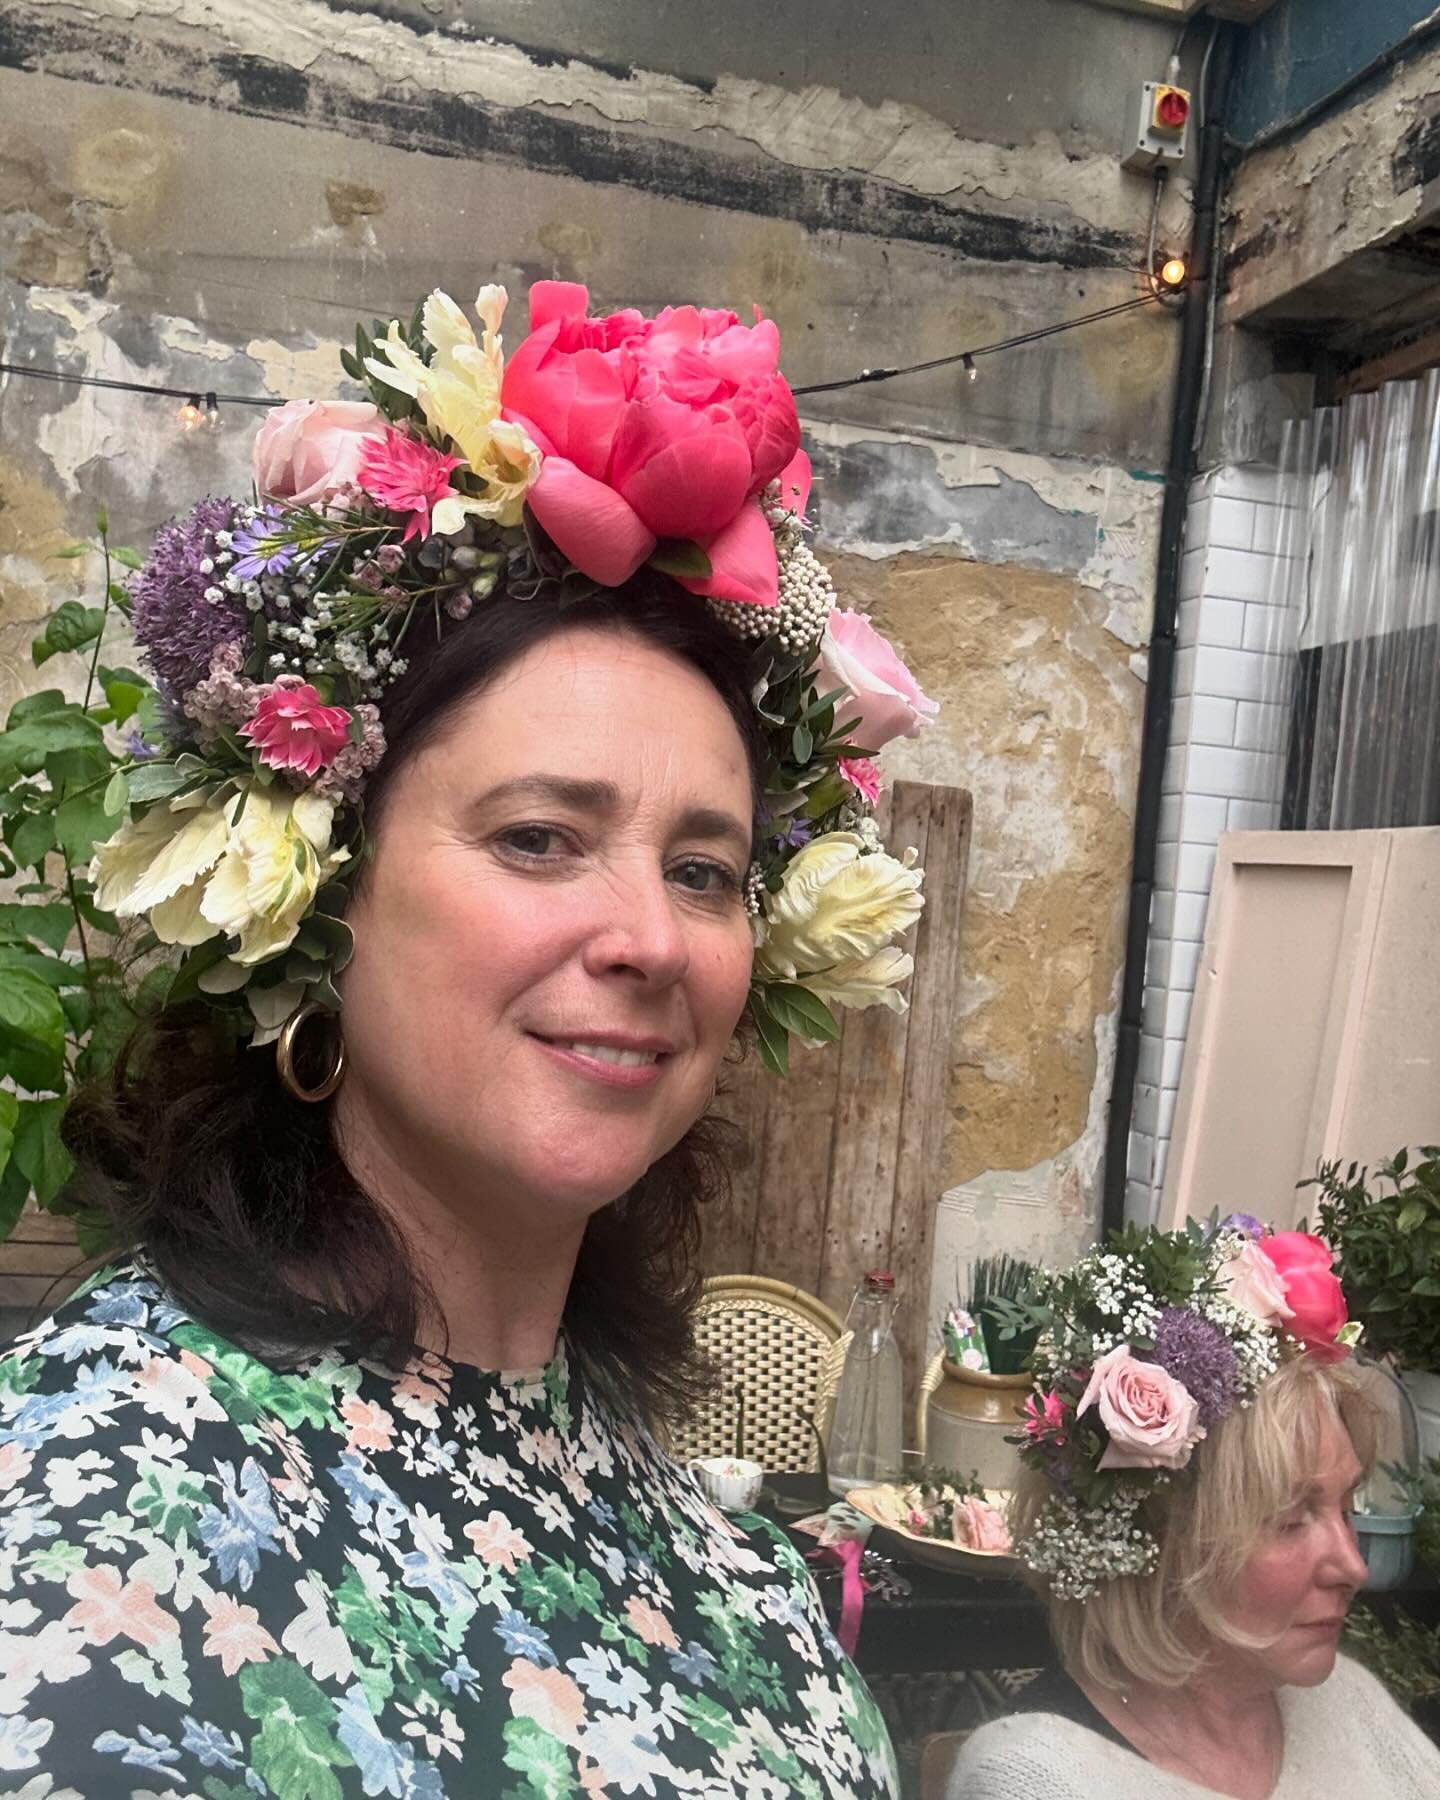 Book a Tipsy-Tea- Party with me @katelangdaleflorist 🌸👑

Perfect for your ~
*Hen Party, 
*Birthday Party, 
*Baby shower, 
*Product launch
- or just gather your mates for some fun flower crown making. 🌸👑✂️🥂🍰

The covered garden @thefrenchhornpub